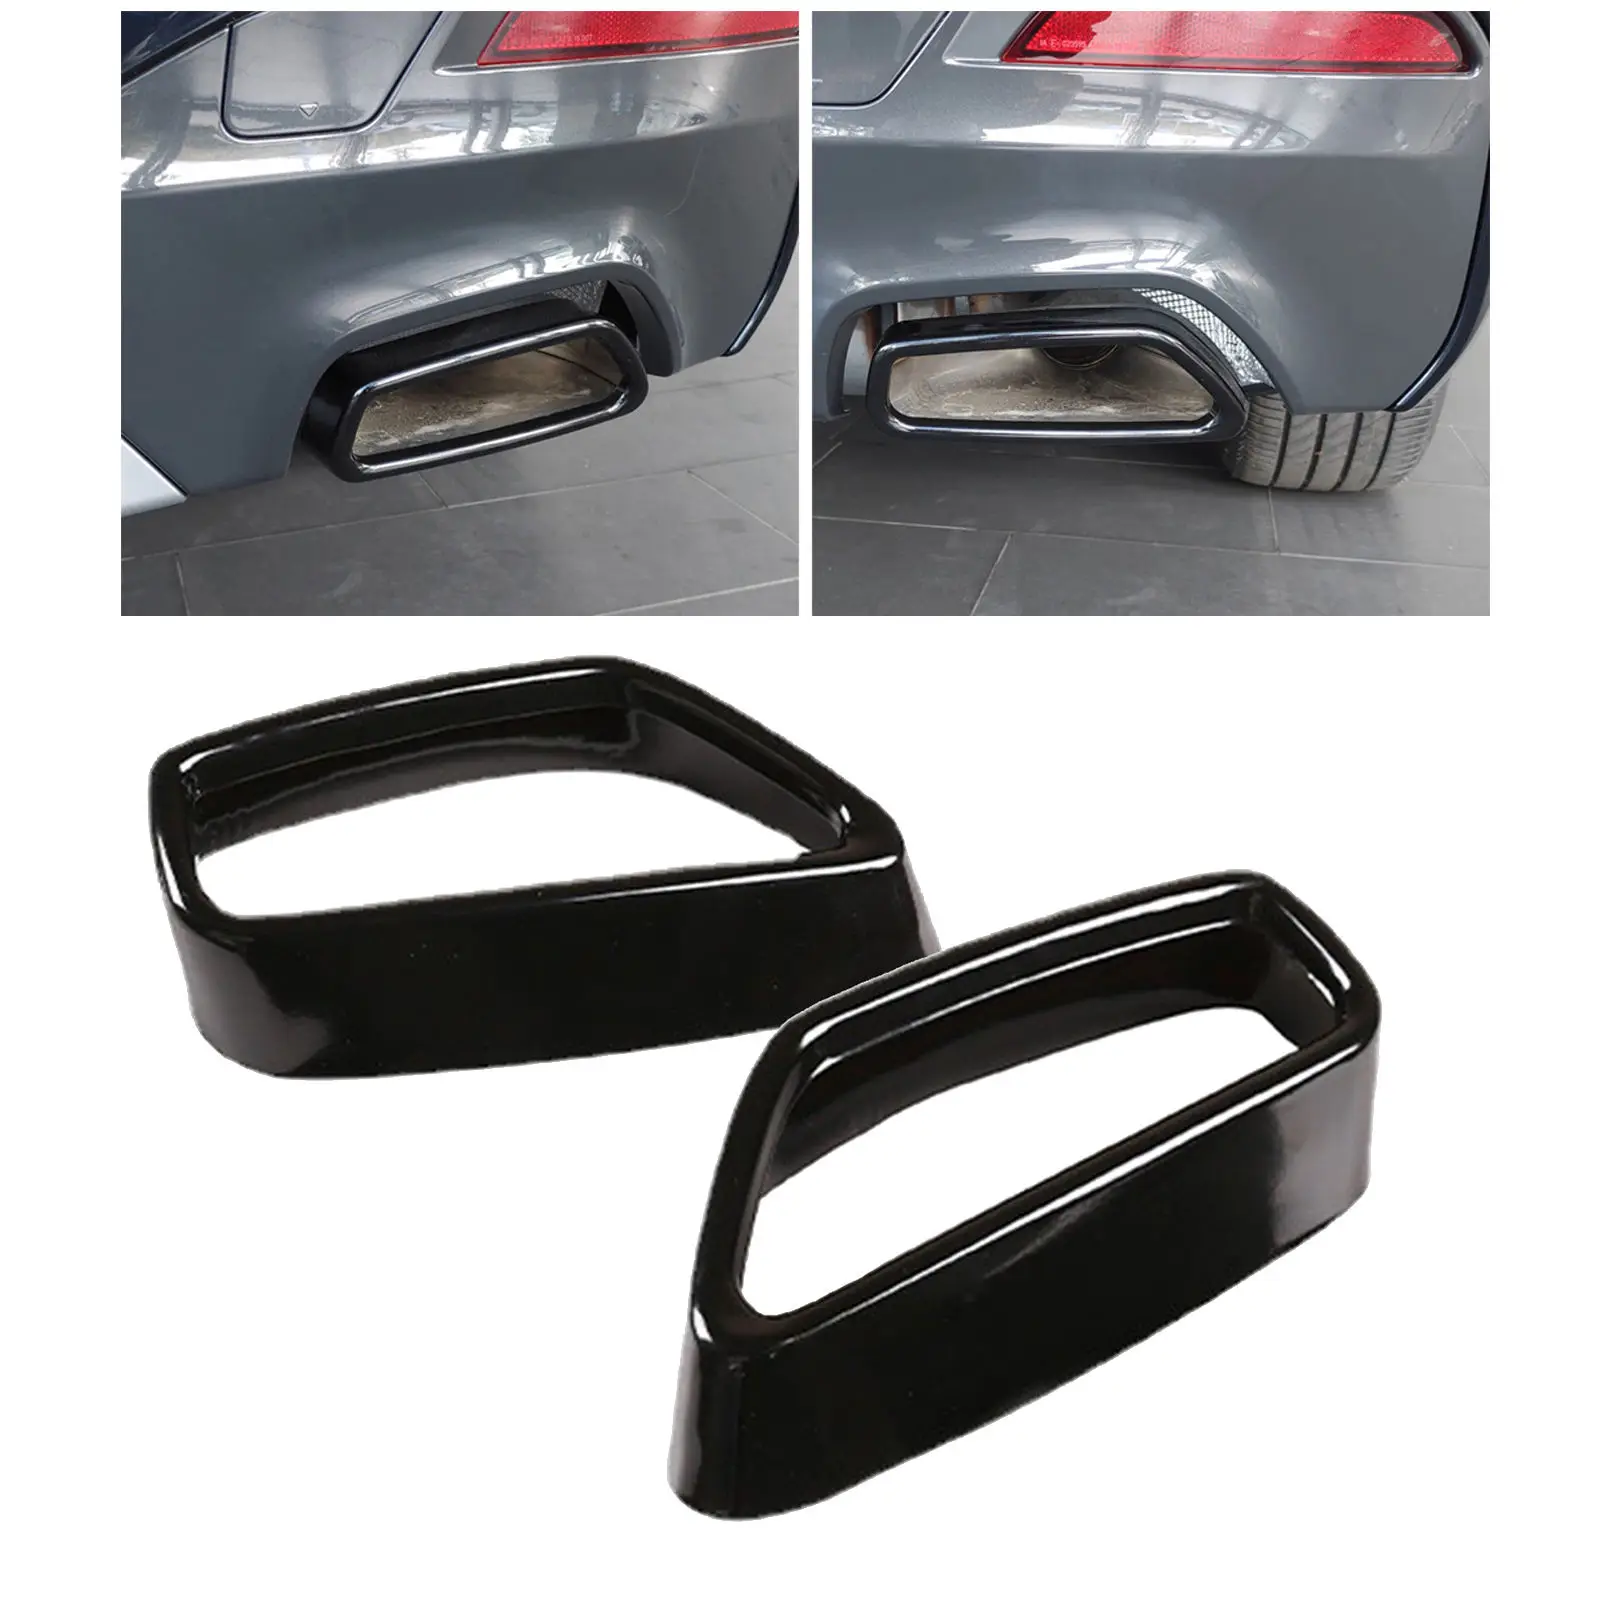 Car Rear Exhaust  Pipe Cover Trim Fits for BMW 5 G30 G38 Professional